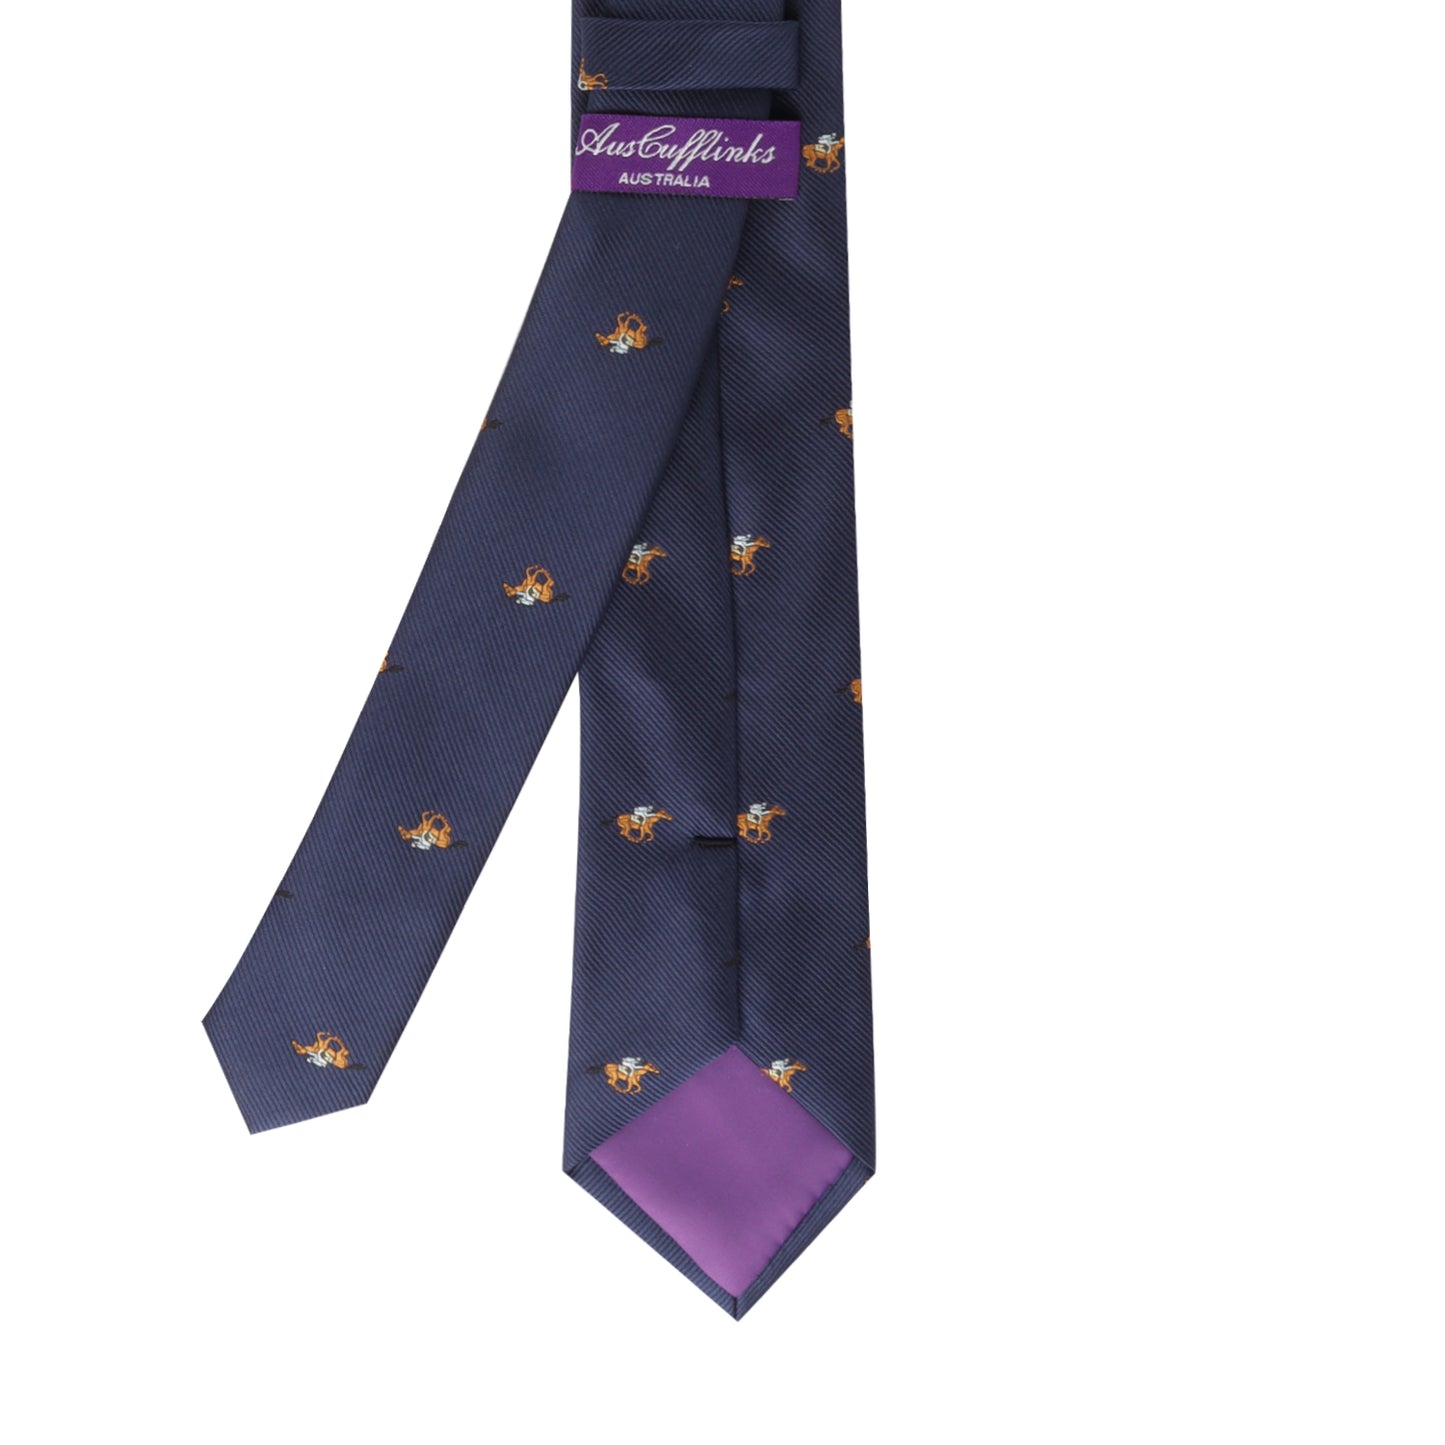 A Horse Racing Skinny Tie with a dashing elegance and featuring a fox.